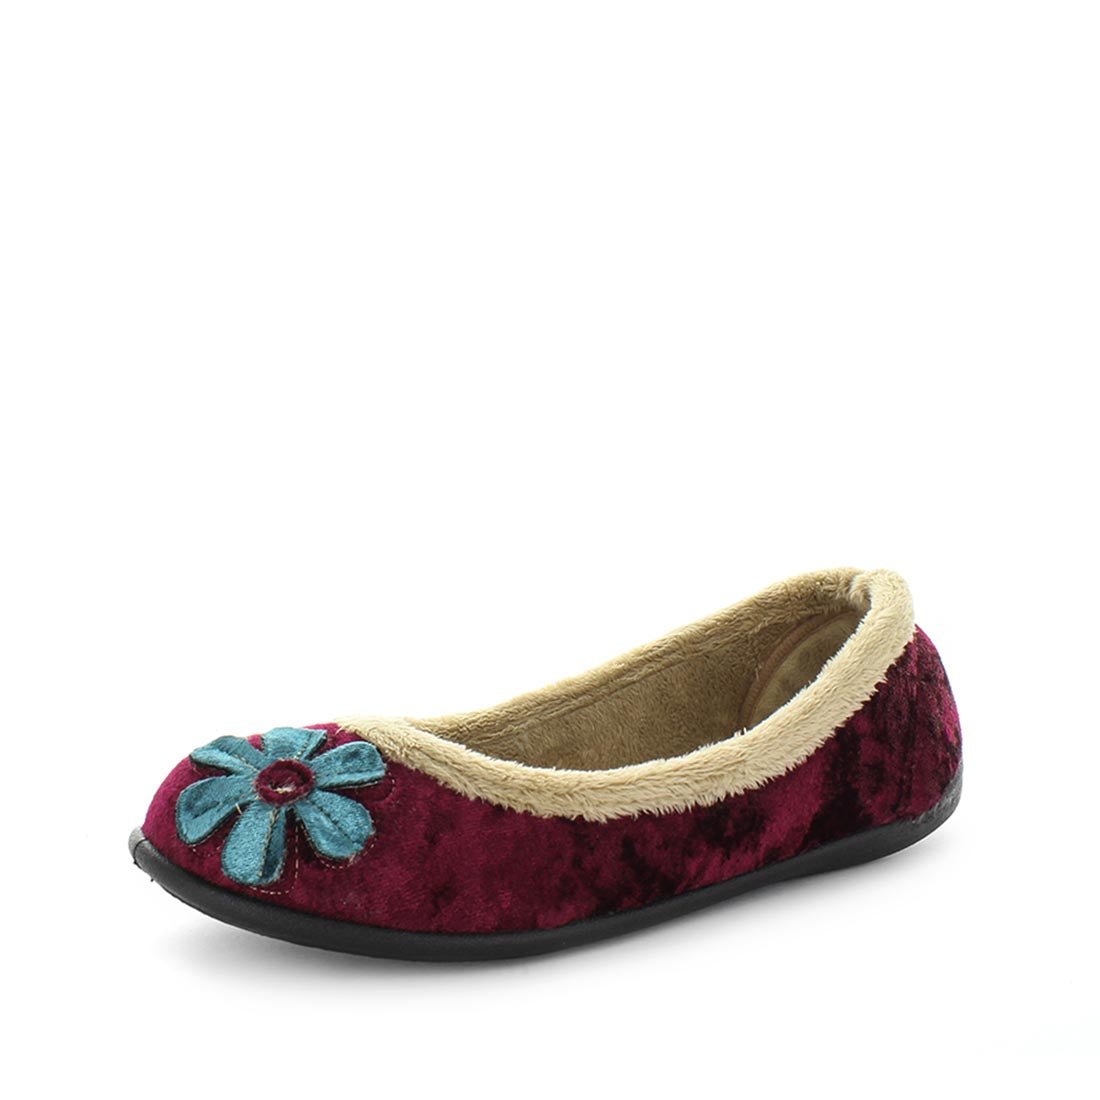 womens slippers - Soft red Elgin slipper with a flower design, by panda Slippers. A ballet flat slipper with a soft micro-terry lining that is soft to the touch and comfy. Designed with an extra comfy fit with a padded footbed.